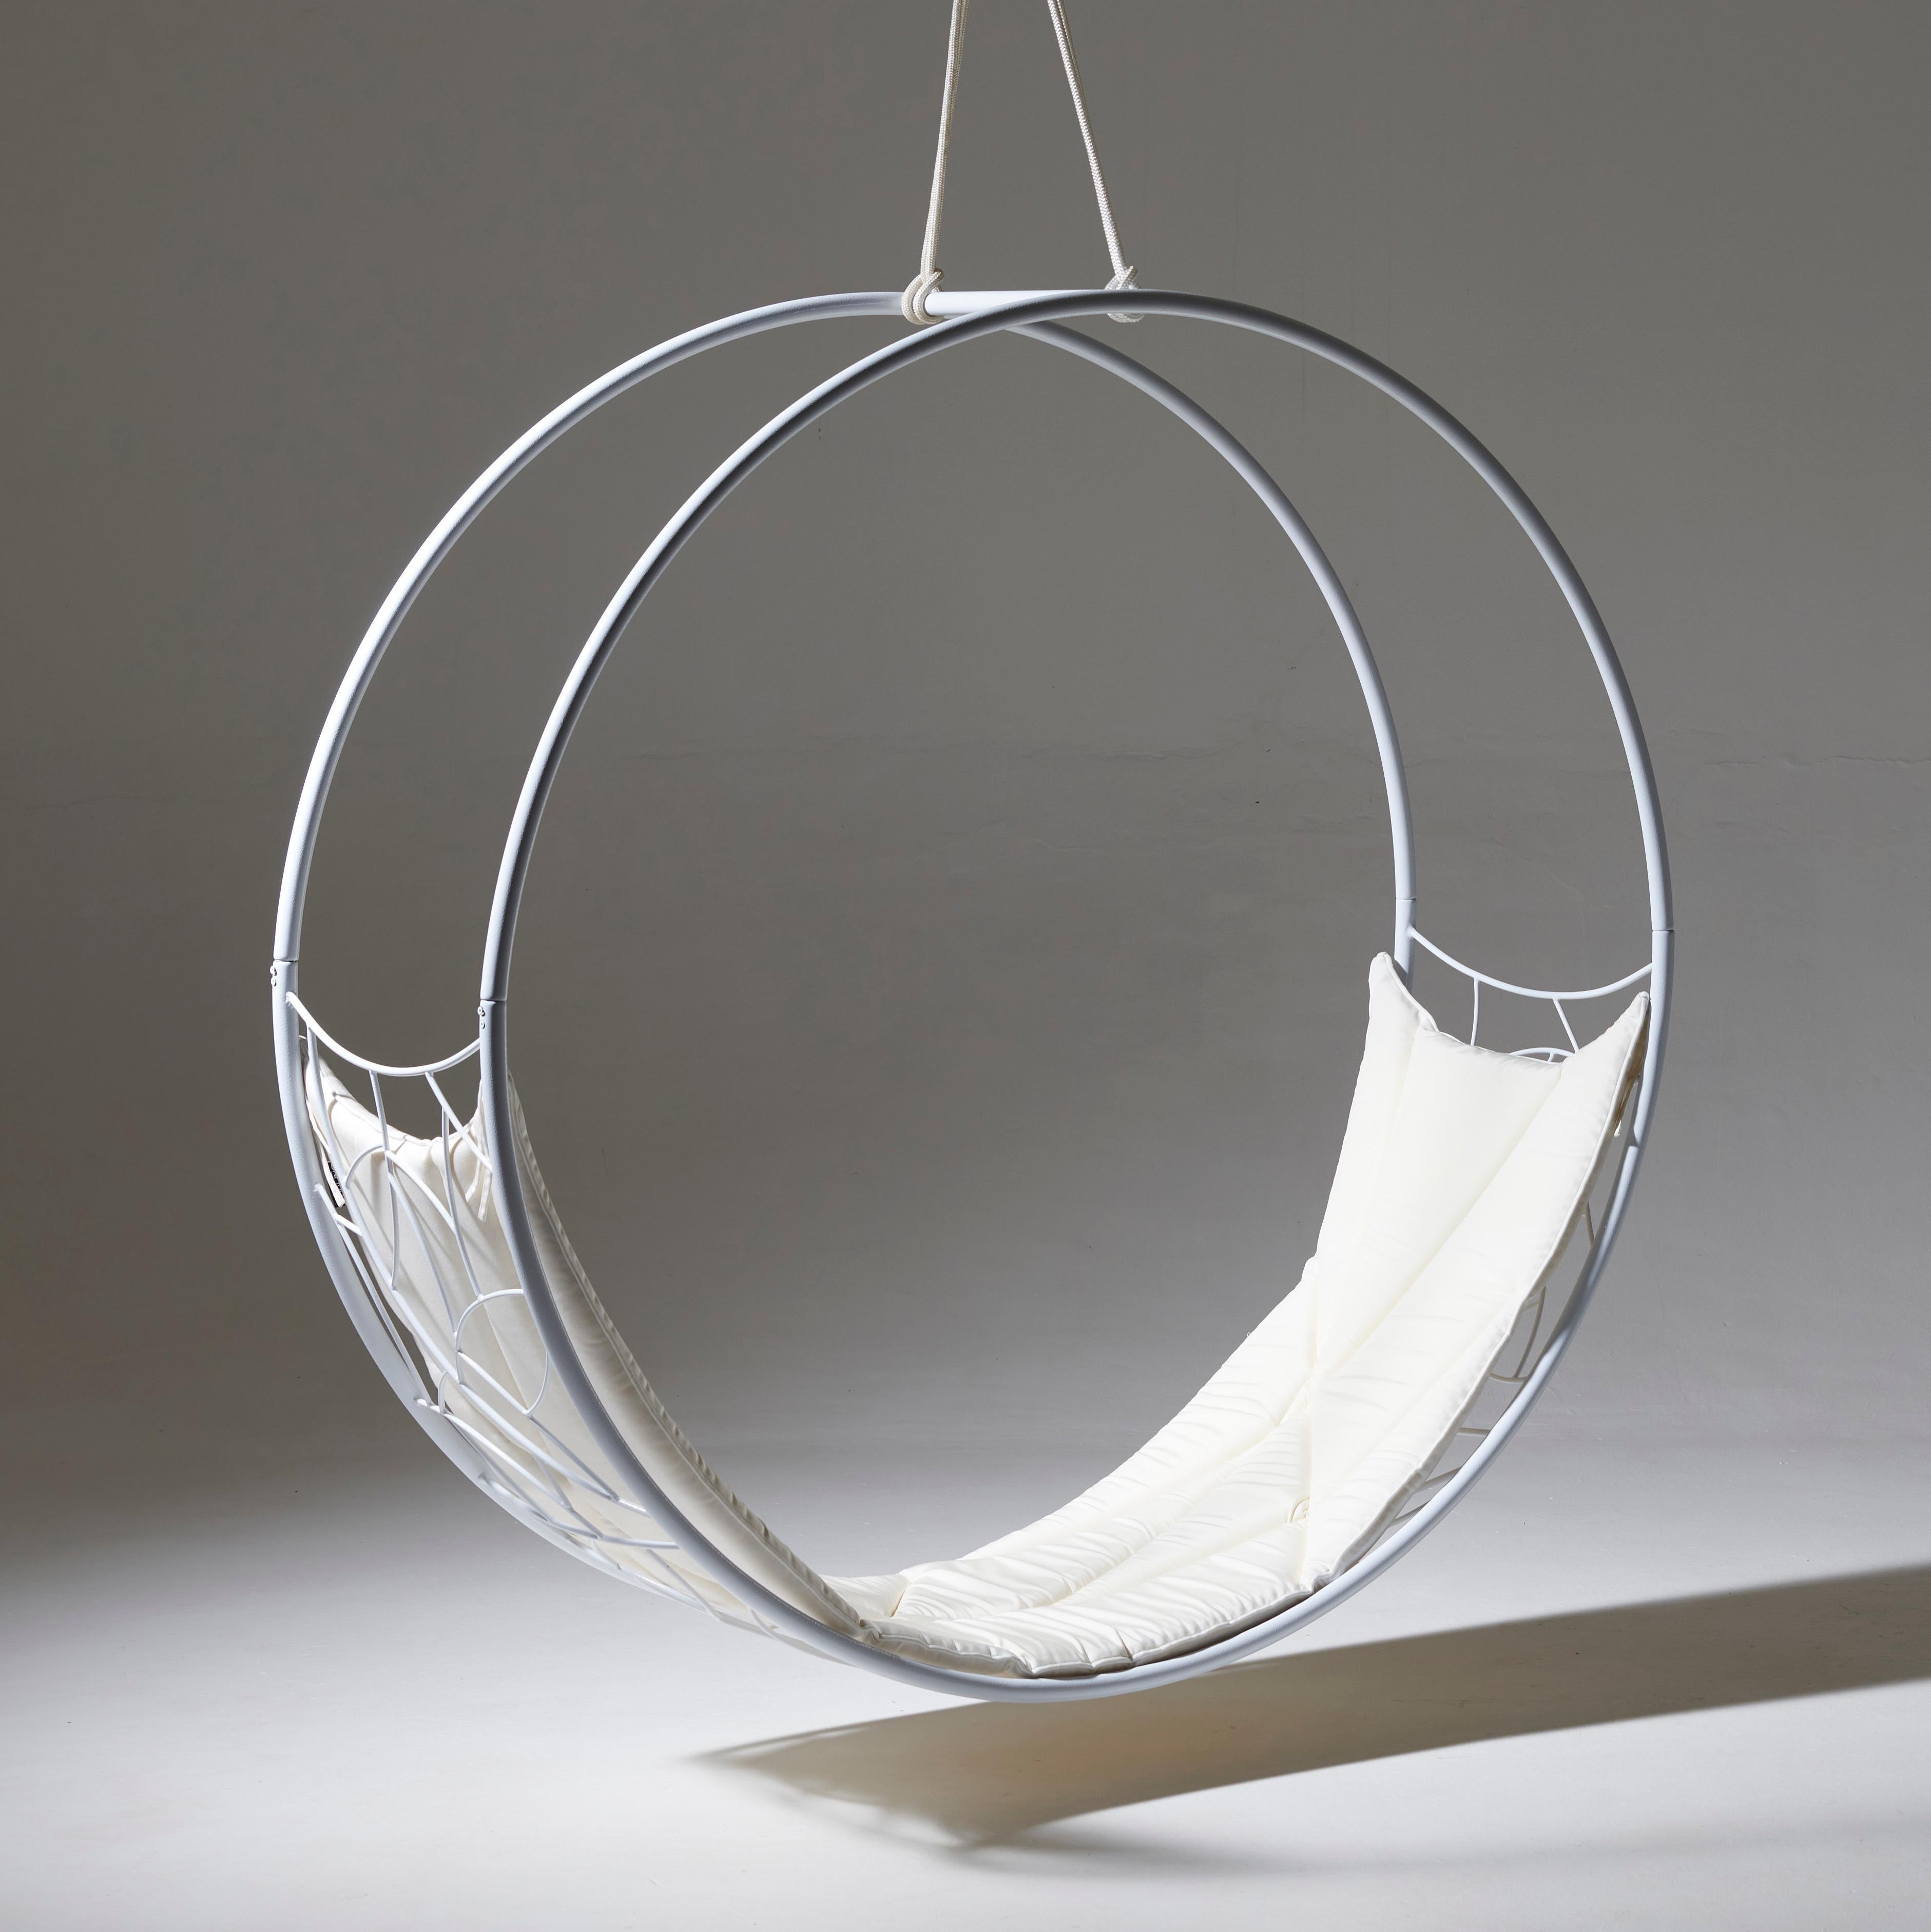 South African Modern Circular Hanging Chair in Pieces for Economic Shipping For Sale